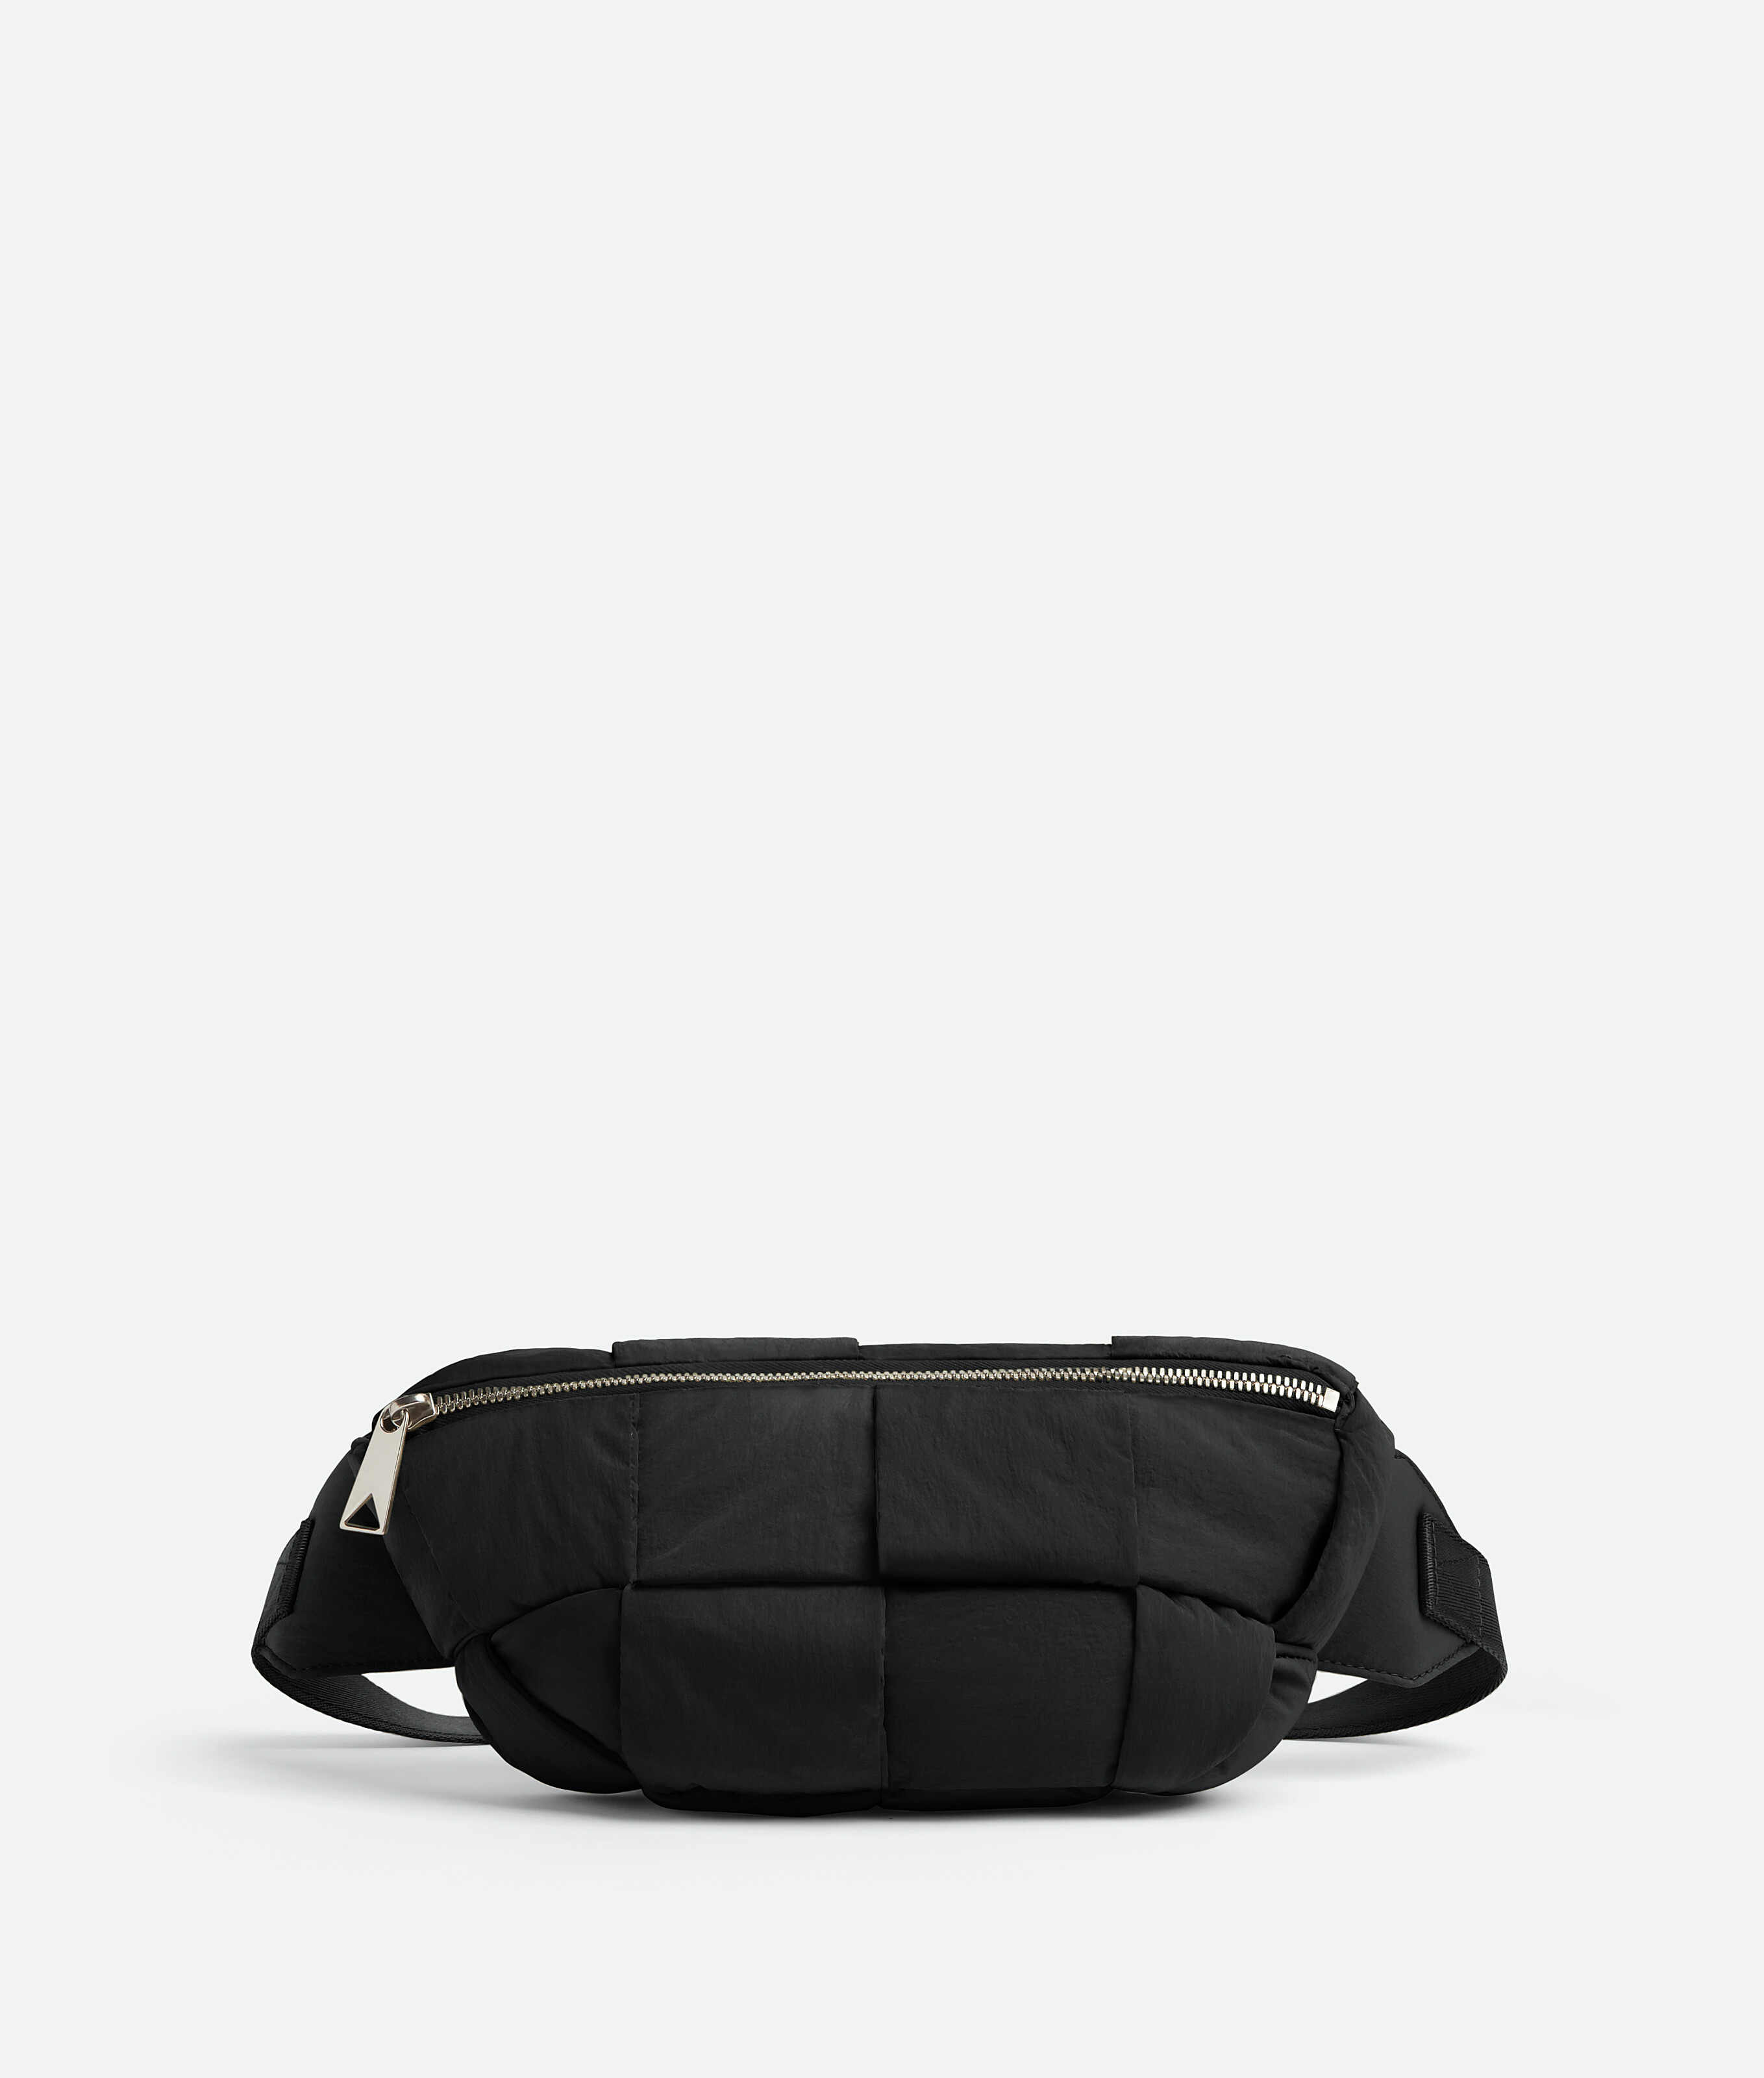 Liner for Bumbag